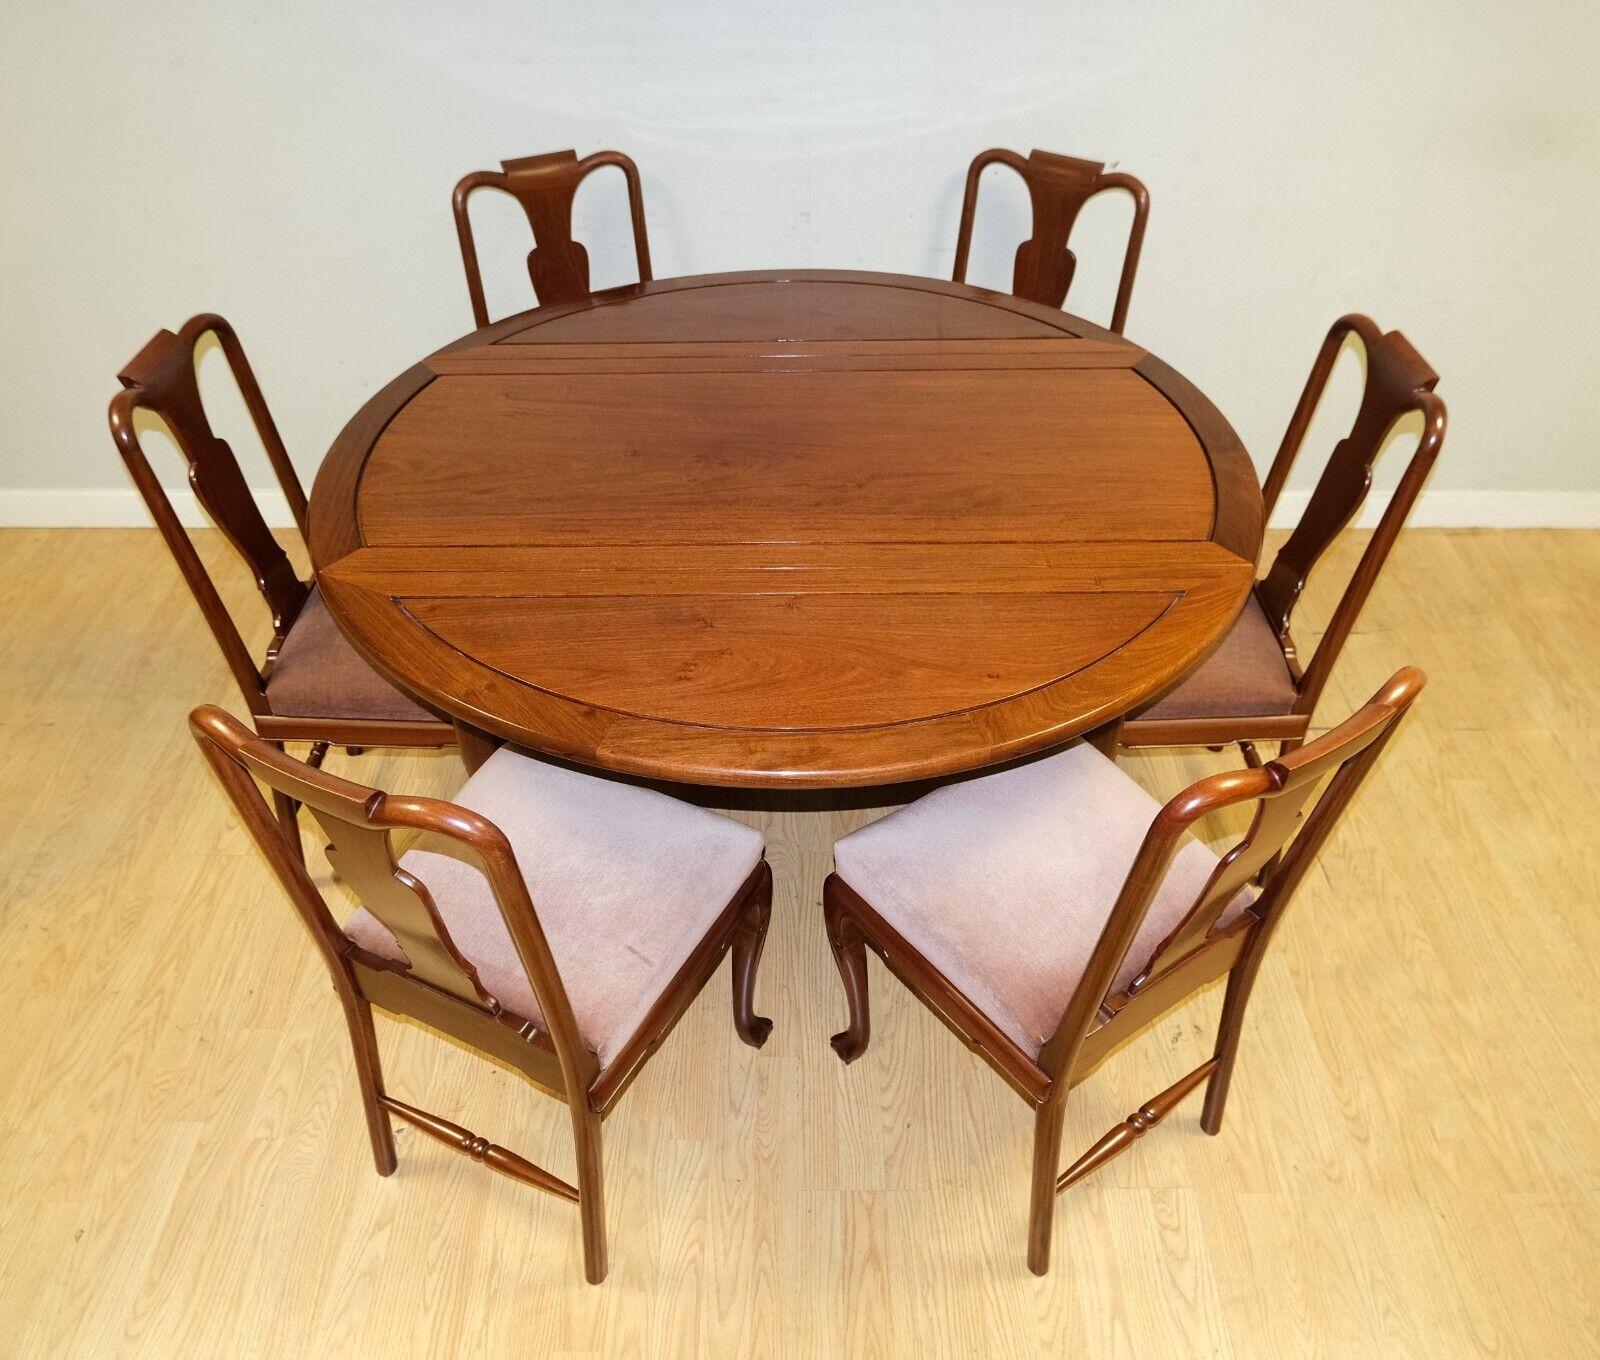 We are delighted to offer for sale this stunning Chinese Rosewood drop leaf dining table on claw and ball feet and eight chairs. 

This well made and good looking set comes with eight chairs on velvet seat covers and a drop leaf table on claw and